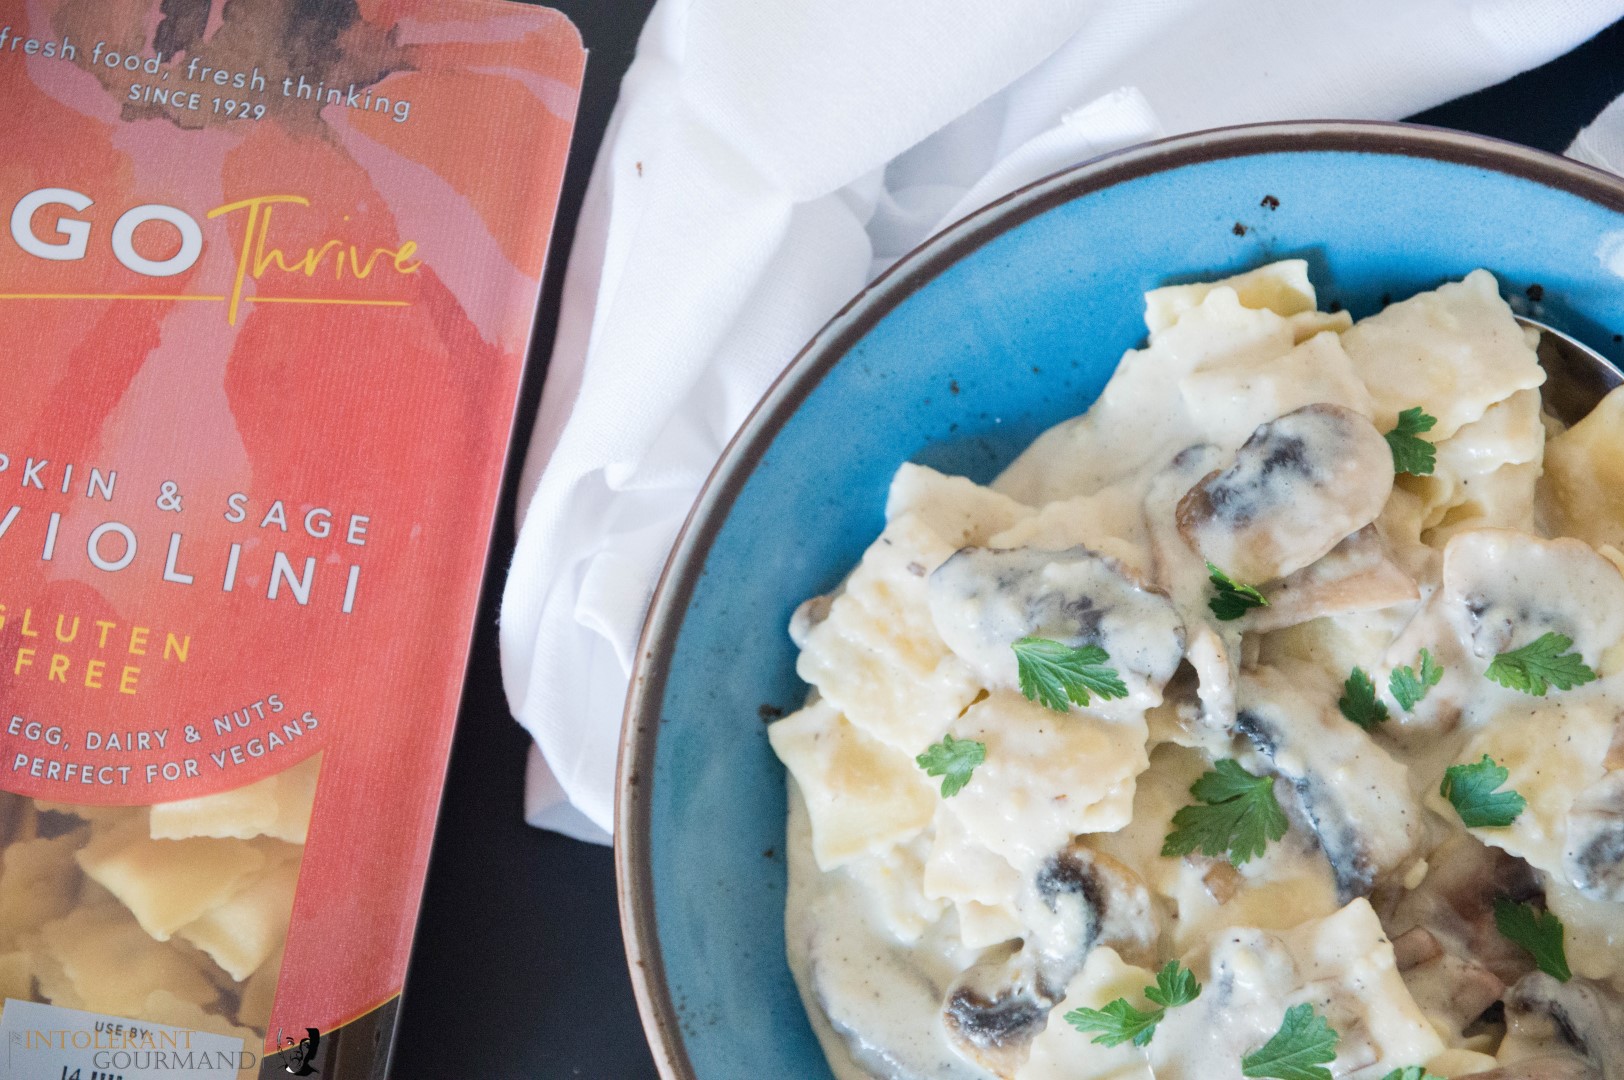 Creamy Mushroom Sauce with Pumpkin Raviolini - a delicously quick and simple dairy-free and gluten-free creamy mushroom sauce paired with pumpkin raviolini to bring the ultimate in comfort food! www.intolerantgourmand.com